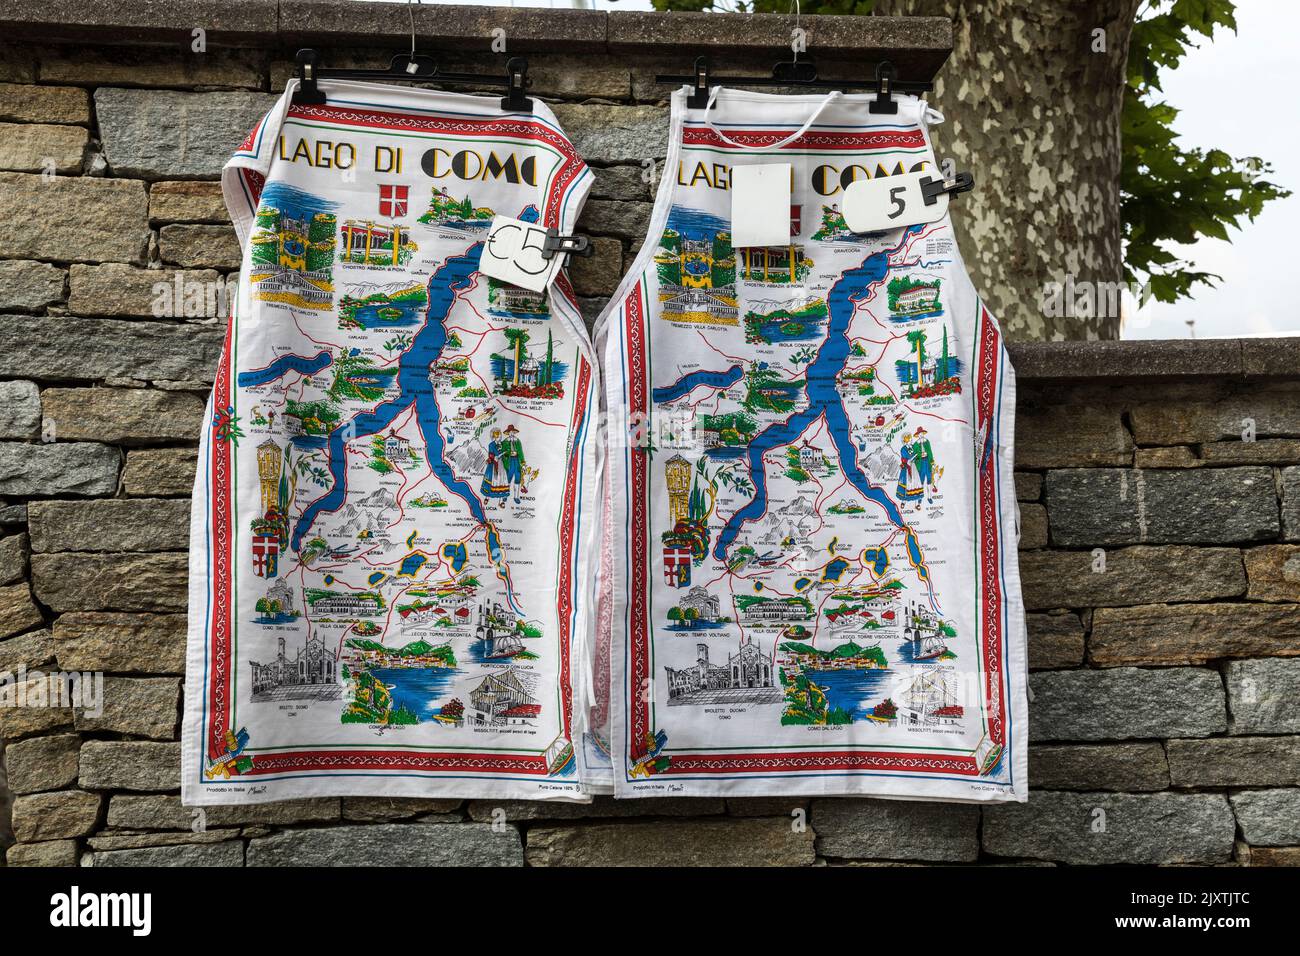 Tea towels for sale depicting Lake Como (Lago di Como) hang from a stone wall, Italy. Stock Photo